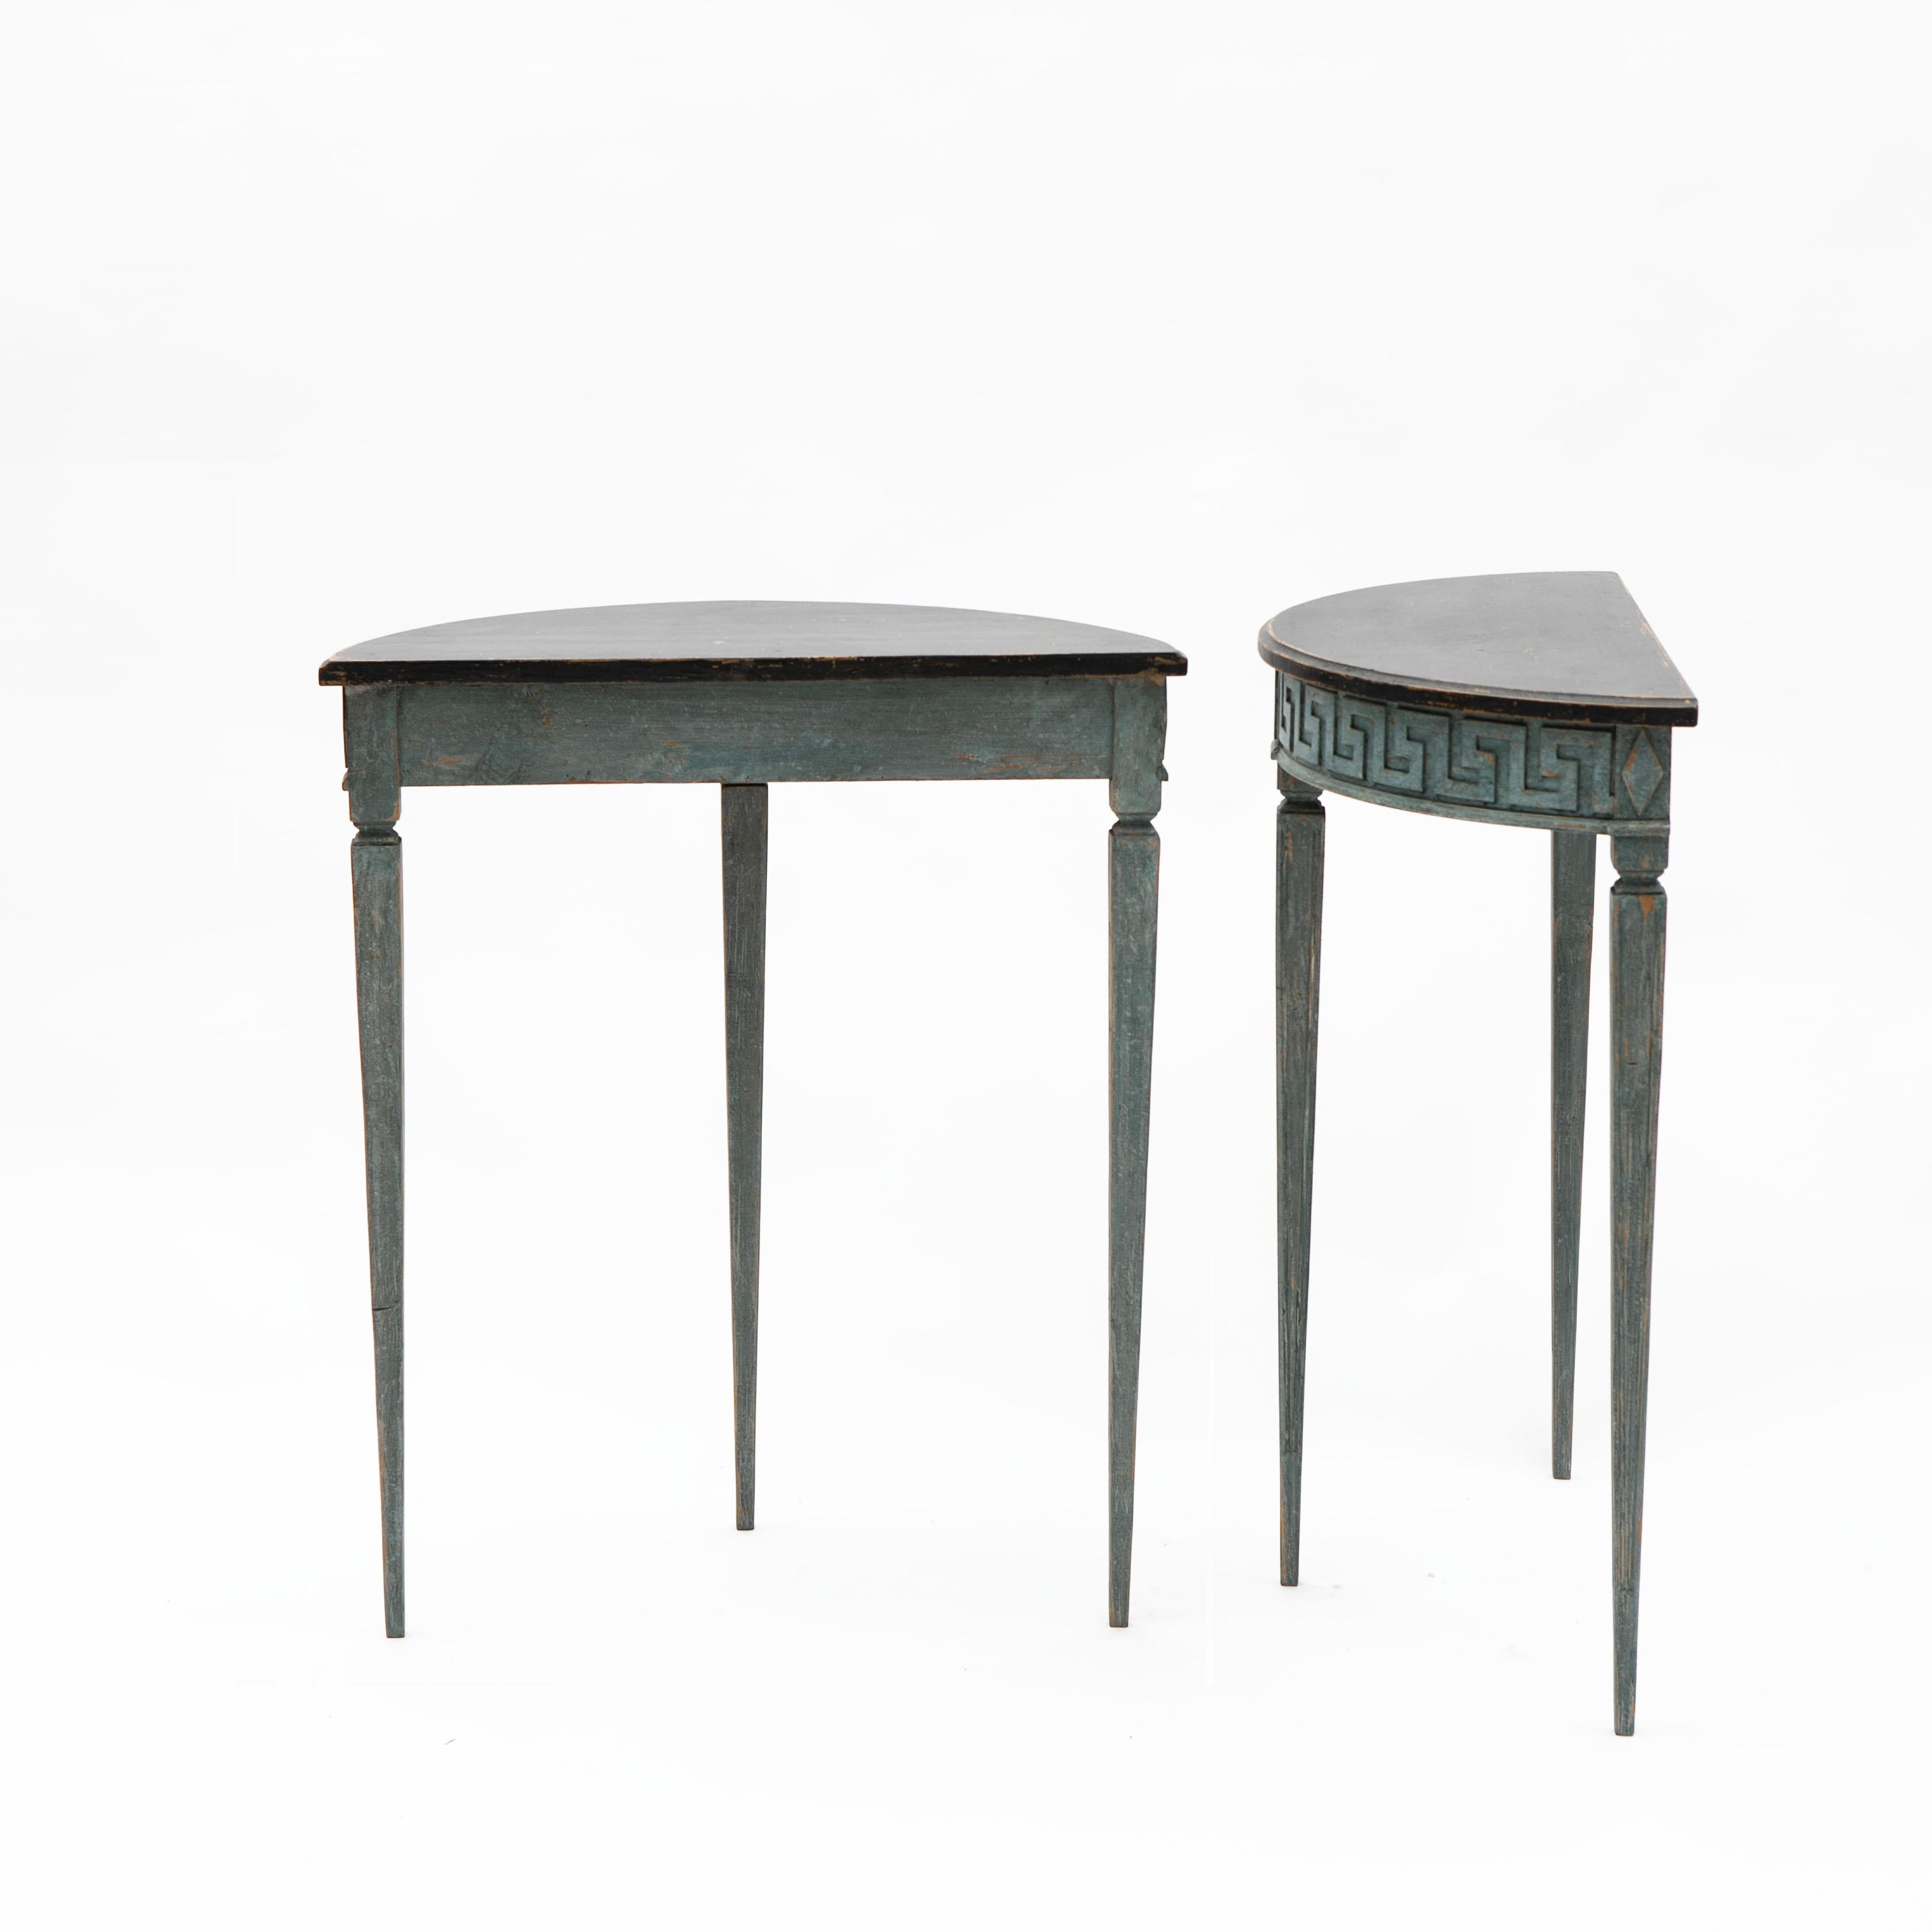 Pair of demilune console tables in Gustavian style.
Black tabletop with profiled edge. Blue-painted base with curved apron featuring carved à la grecque border and diamonds. Tapered legs with fluting.

Sweden, circa 1900.

Sold as a pair.